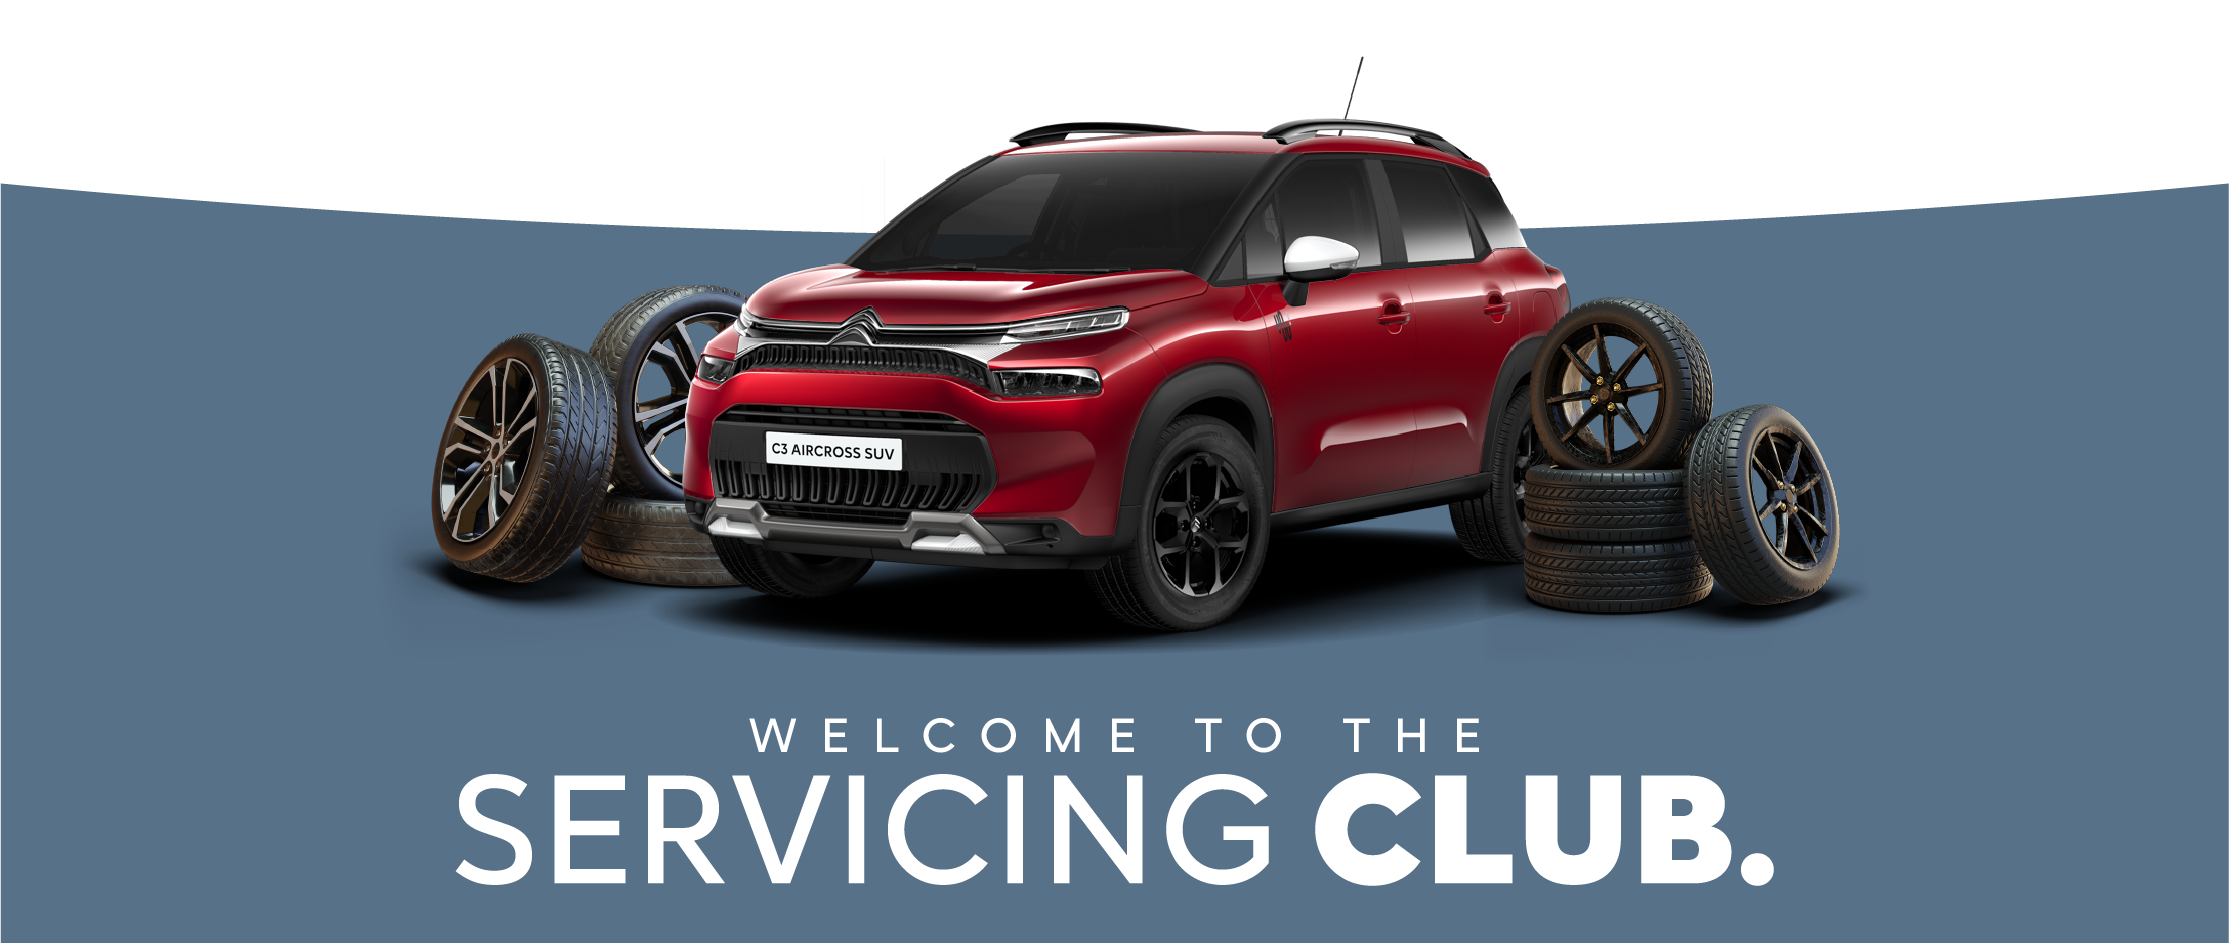 Welcome To The Servicing Club